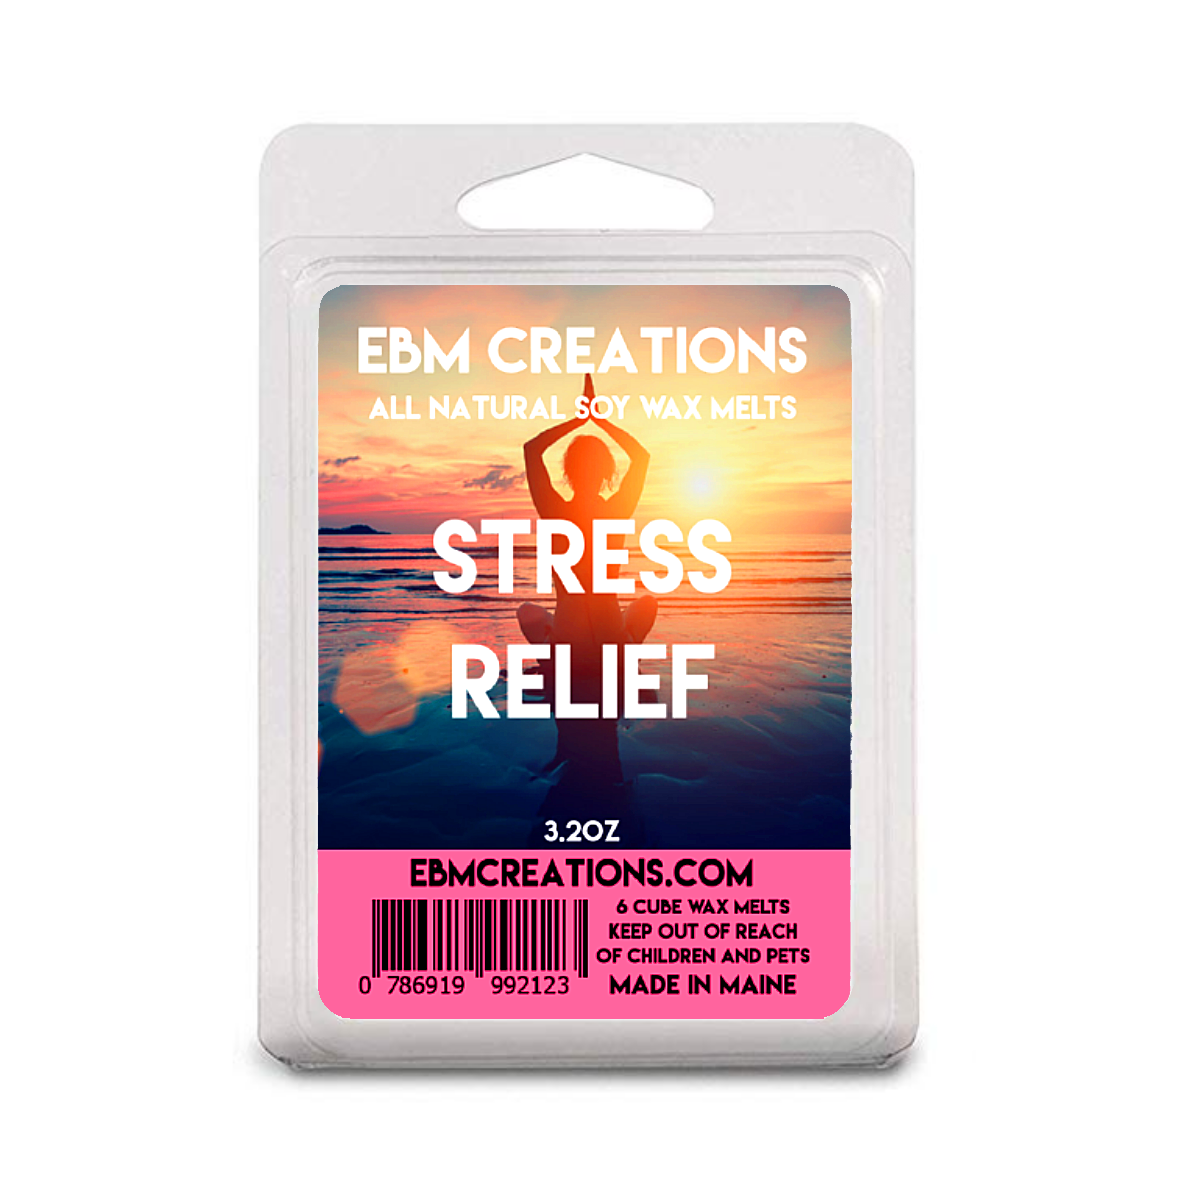 Stress Relief - 3.2 oz Clamshell